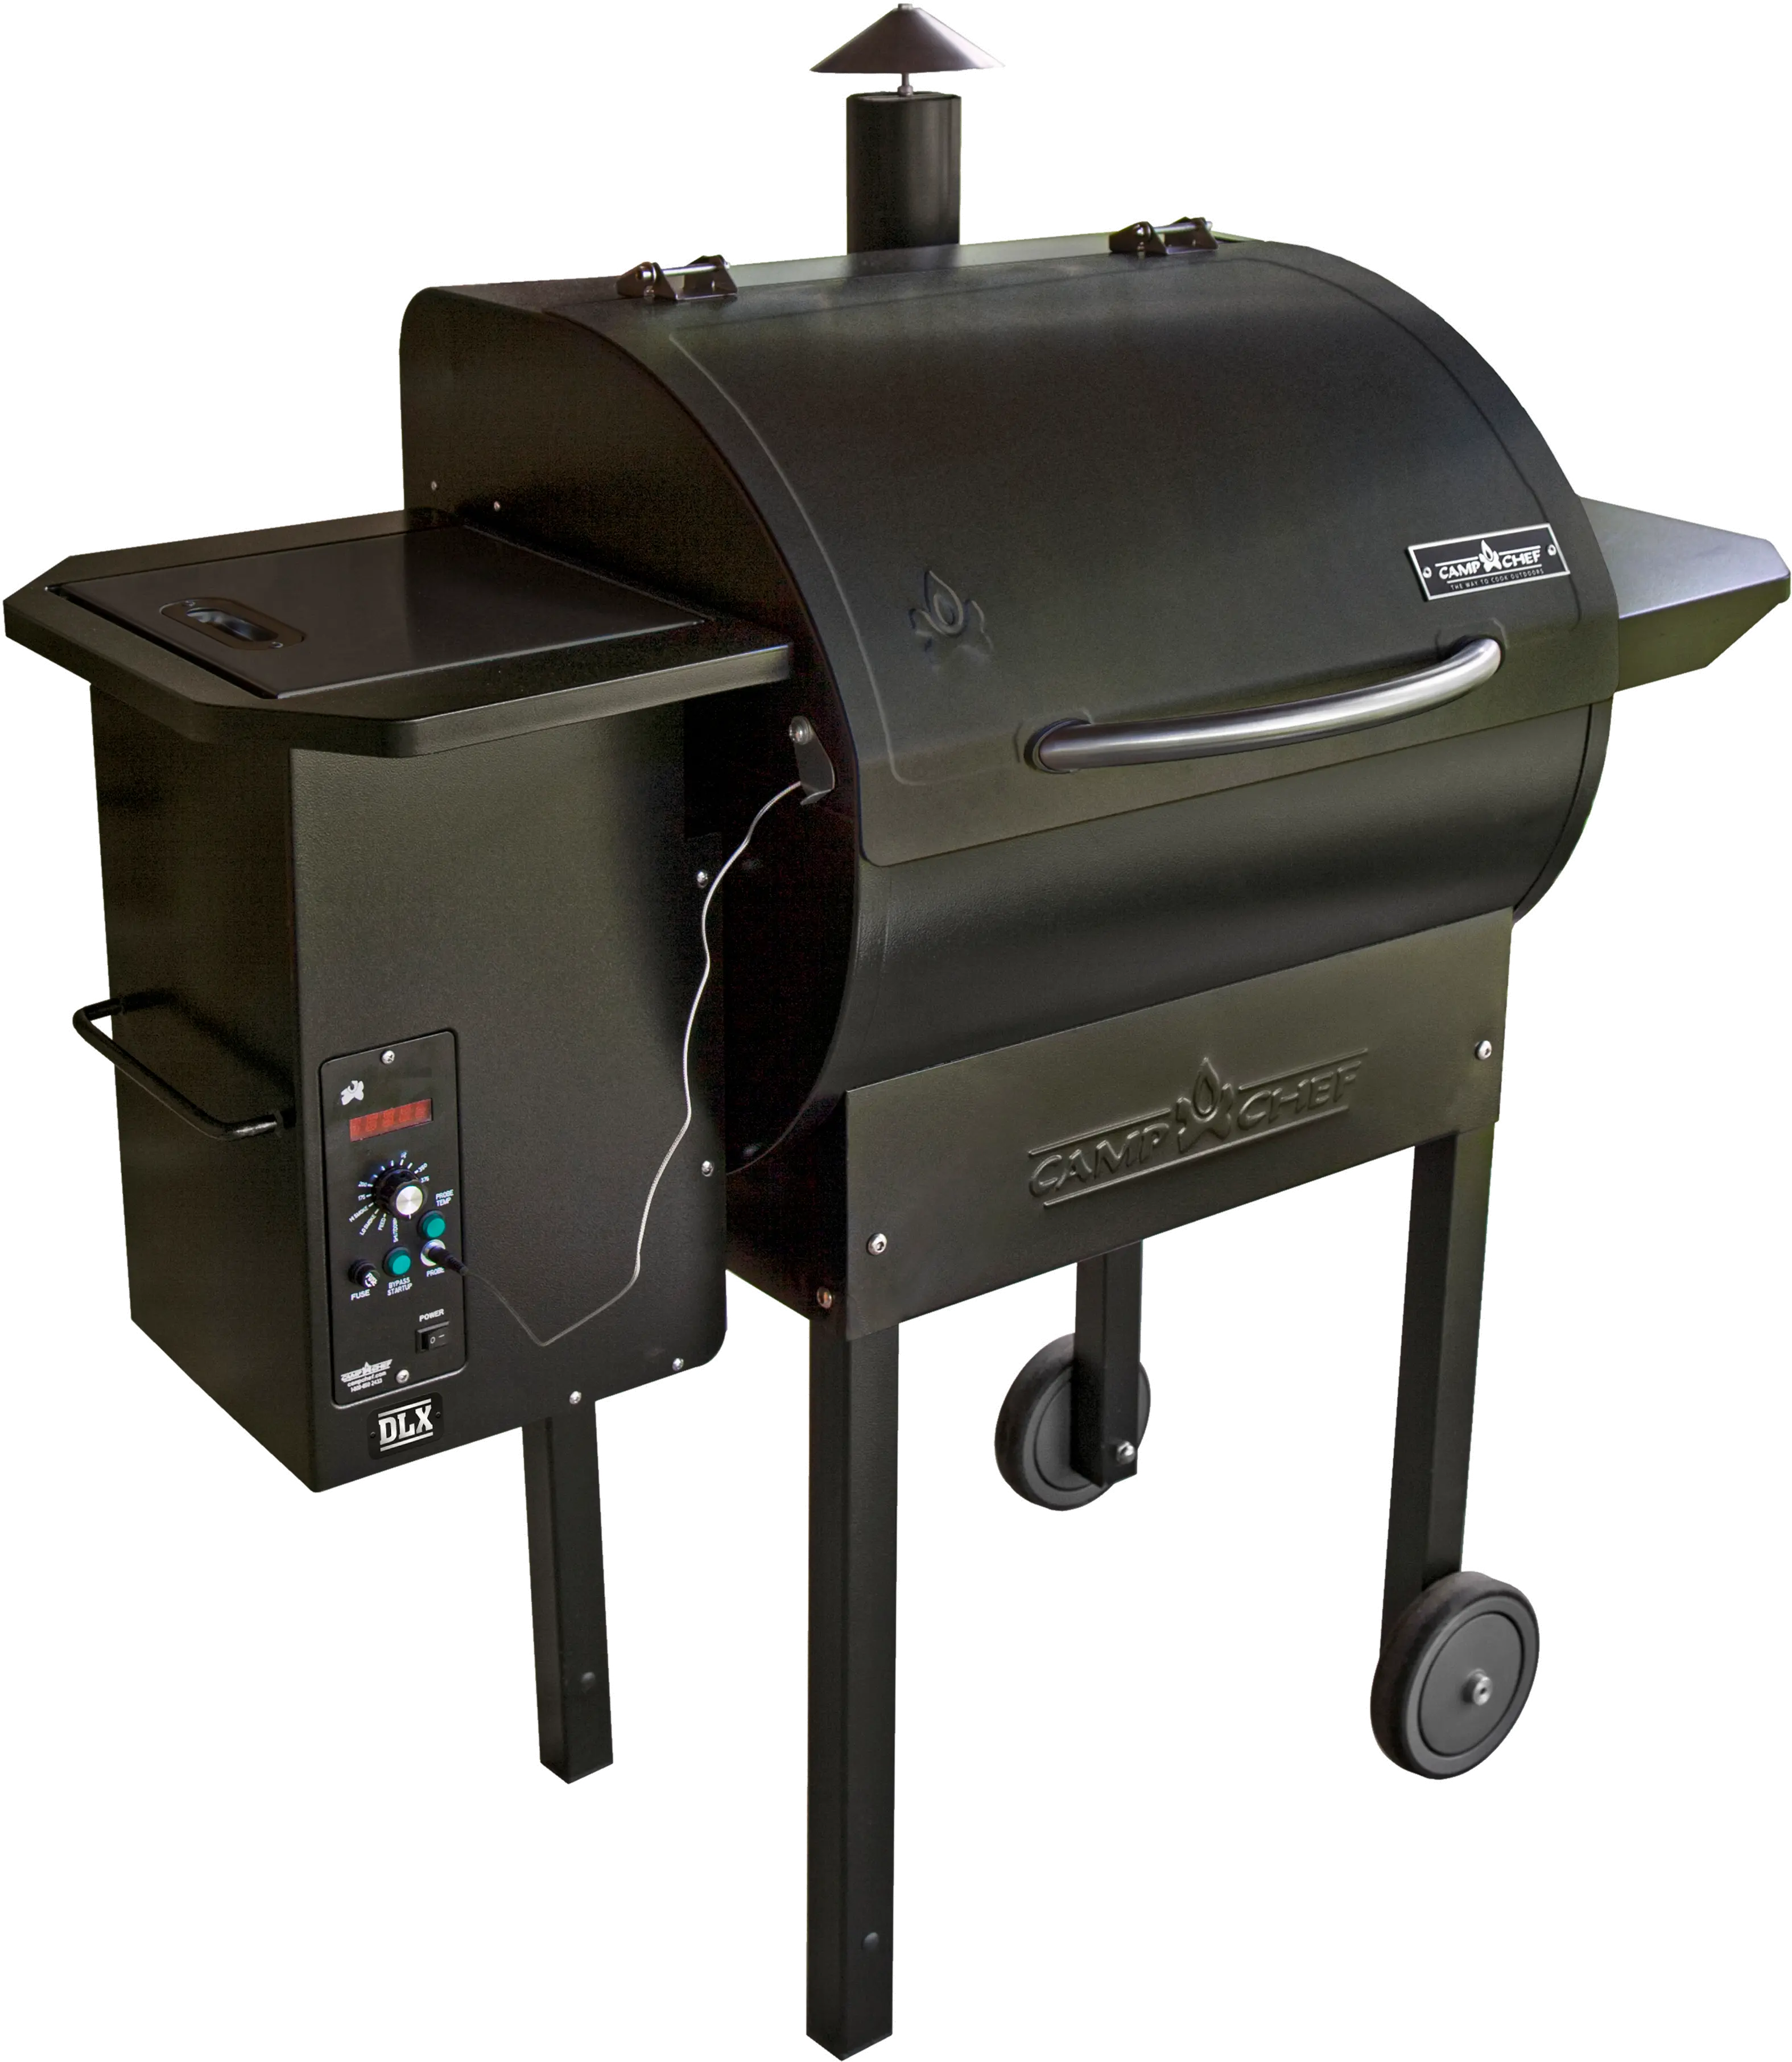 Camp Chef Pellet Grill & Smoker DLX